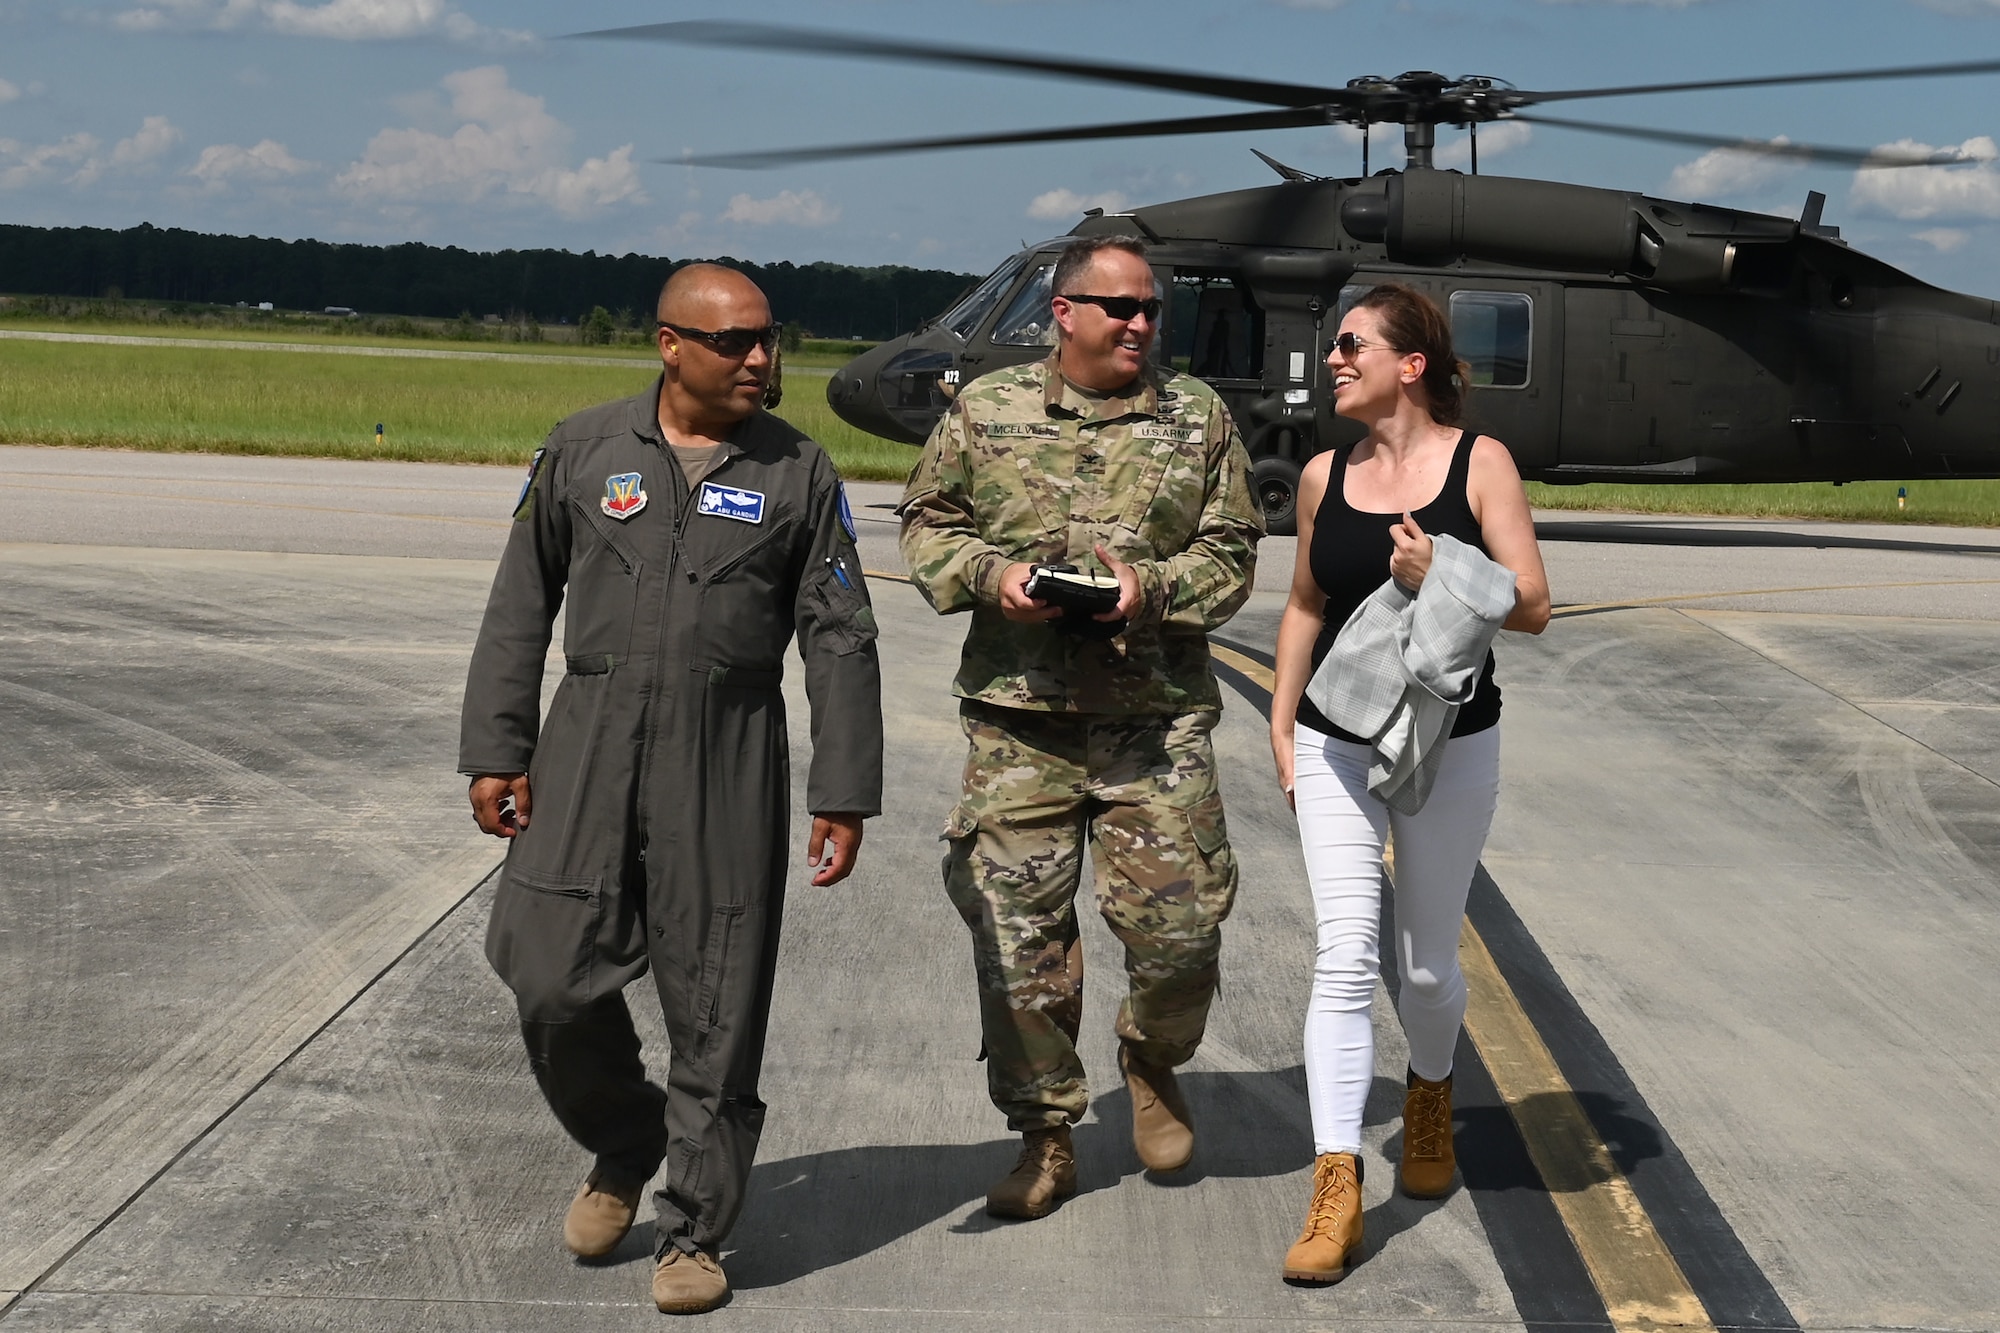 U.S. Rep. Nancy Mace from Charleston, South Carolina exits a UH-60 Black Hawk helicopter with U.S. Army Col. John McElveen, 59th Troop Command commander and U.S. Air Force Col. Akshai Gandhi, 169th Fighter Wing commander, after an aerial tour of McEntire Joint National Guard Base and the McCrady Training Center, South Carolina during her visit Aug. 19, 2021. The purpose of her visit is to meet with South Carolina National Guard leadership to discuss the current state of the South Carolina National Guard and future endeavors for the organization as well as a familiarization of the base and the capabilities of the units housed there. (U.S. Air National Guard photo by Senior Master Sgt. Edward Snyder, 169th Fighter Wing Public Affairs)